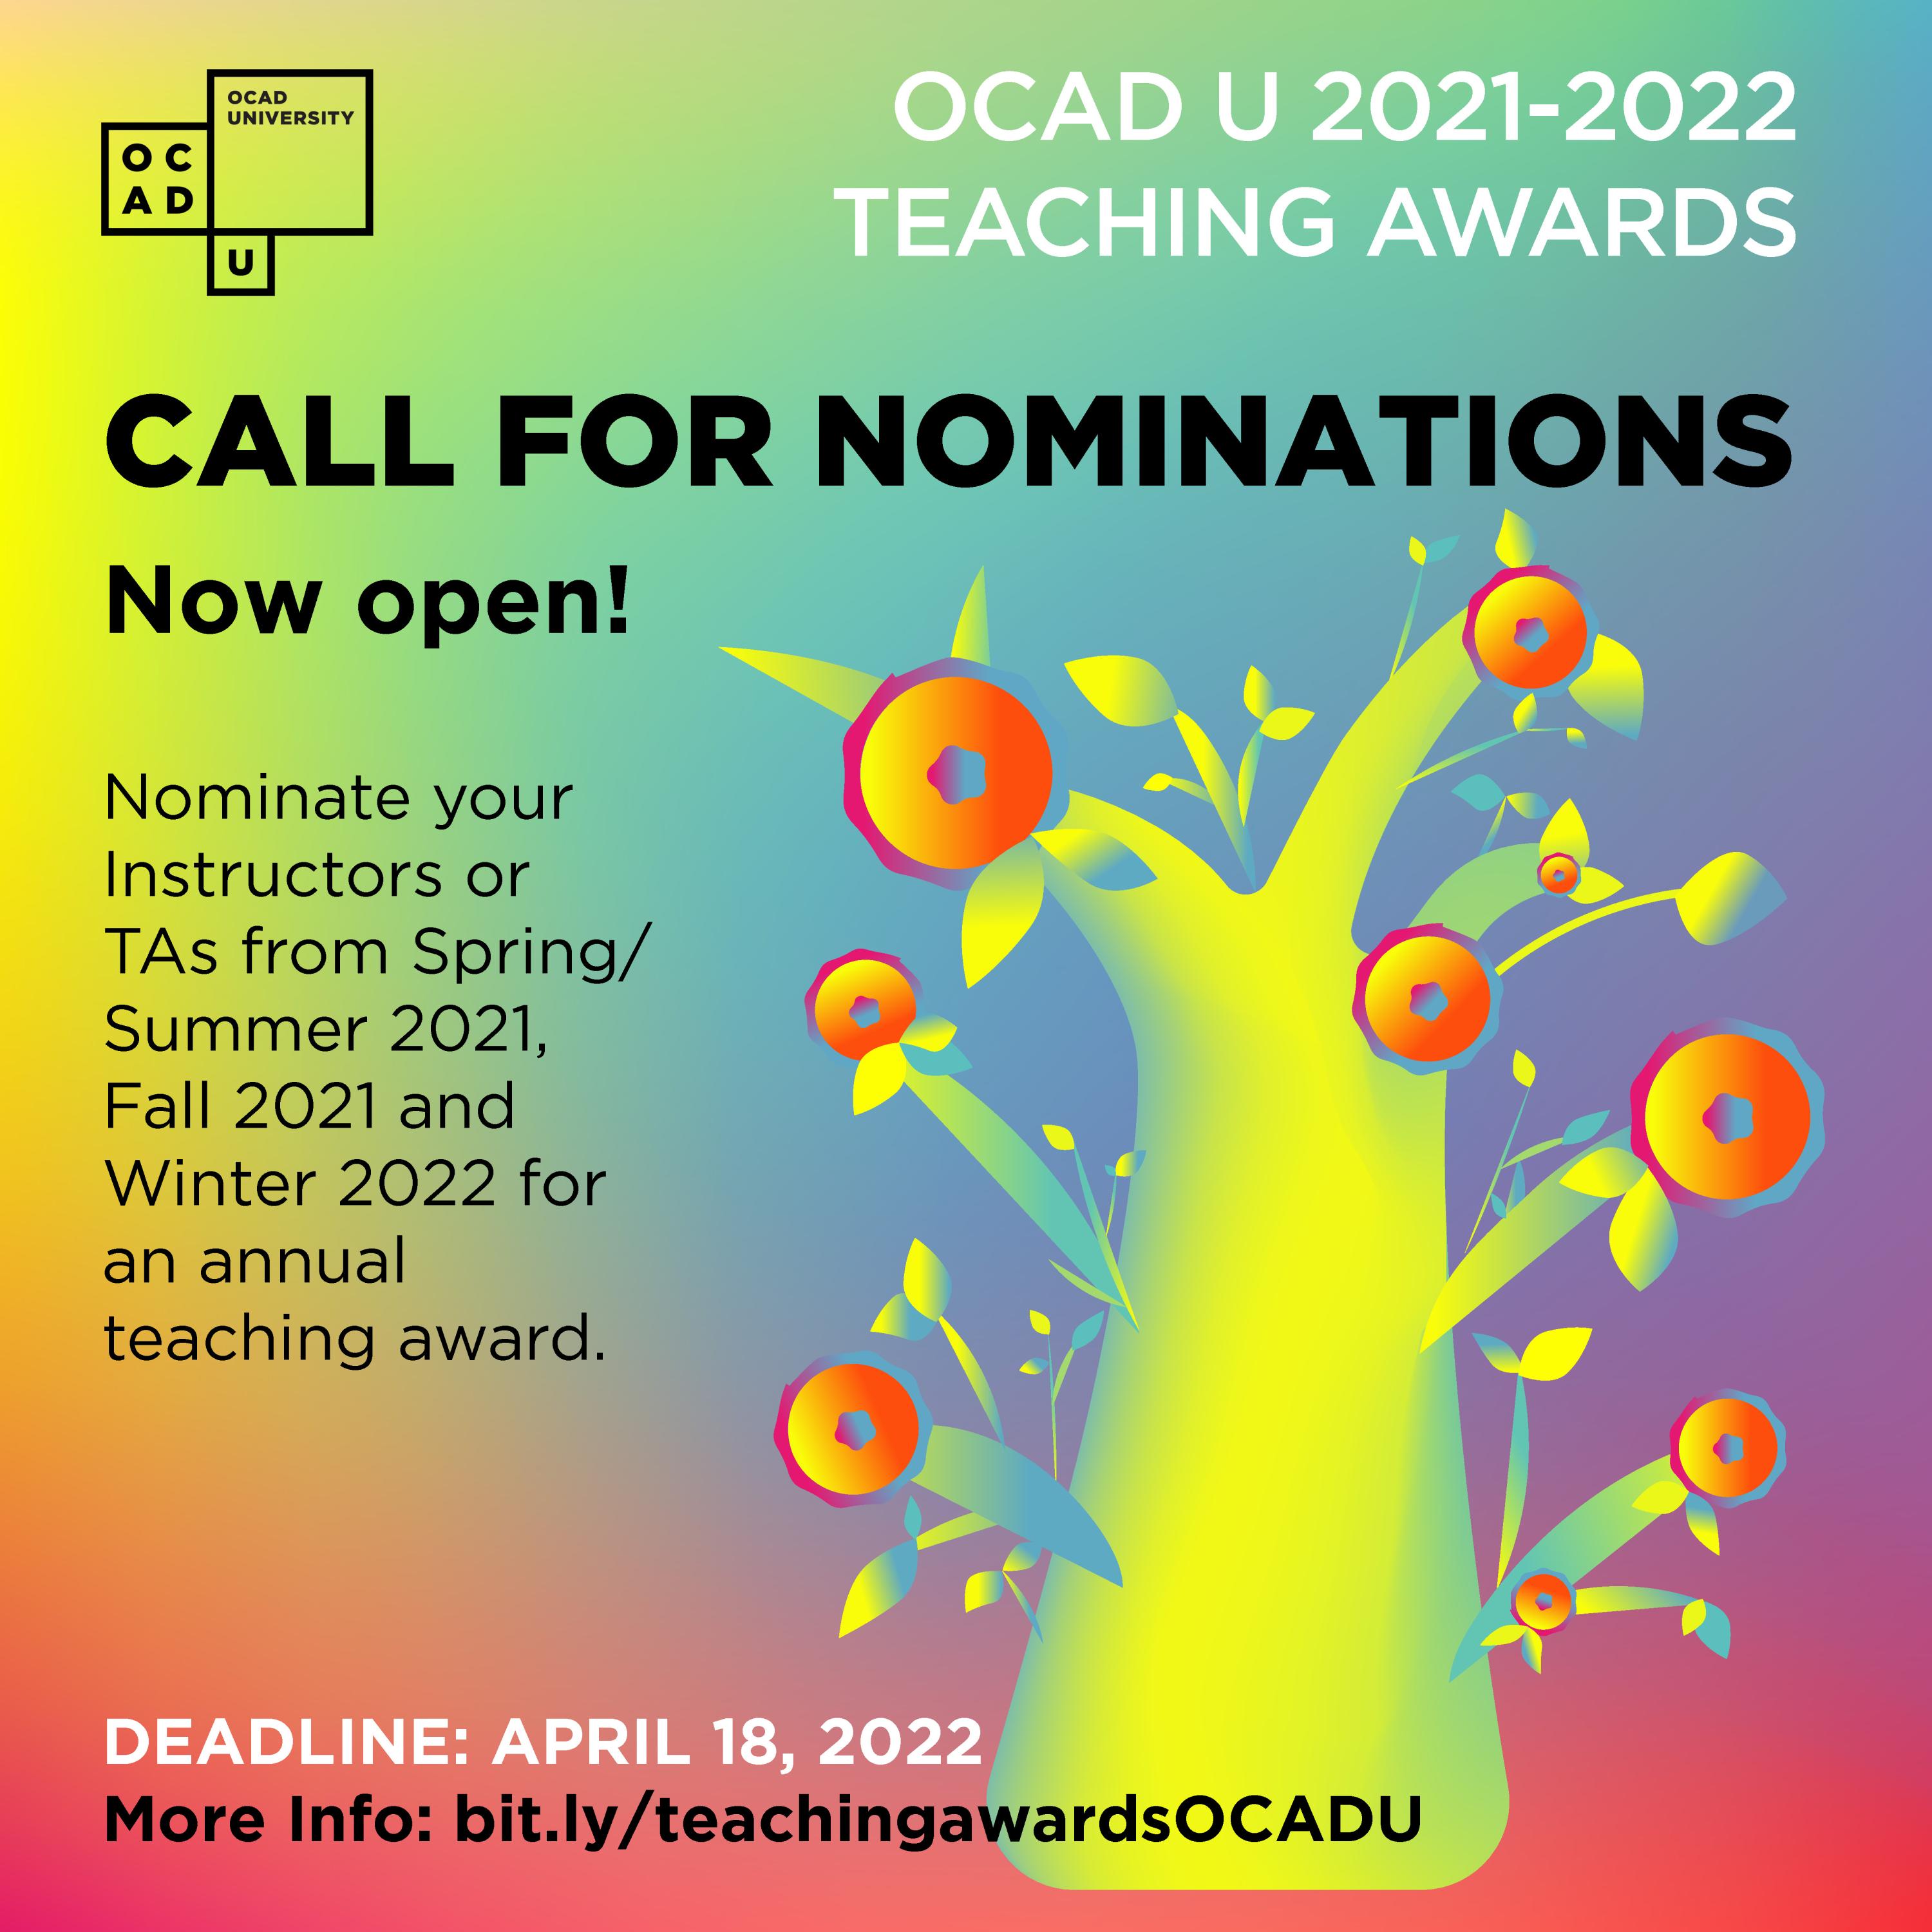 OCAD U 2021-2022 Teaching Awards Call for Nominations poster